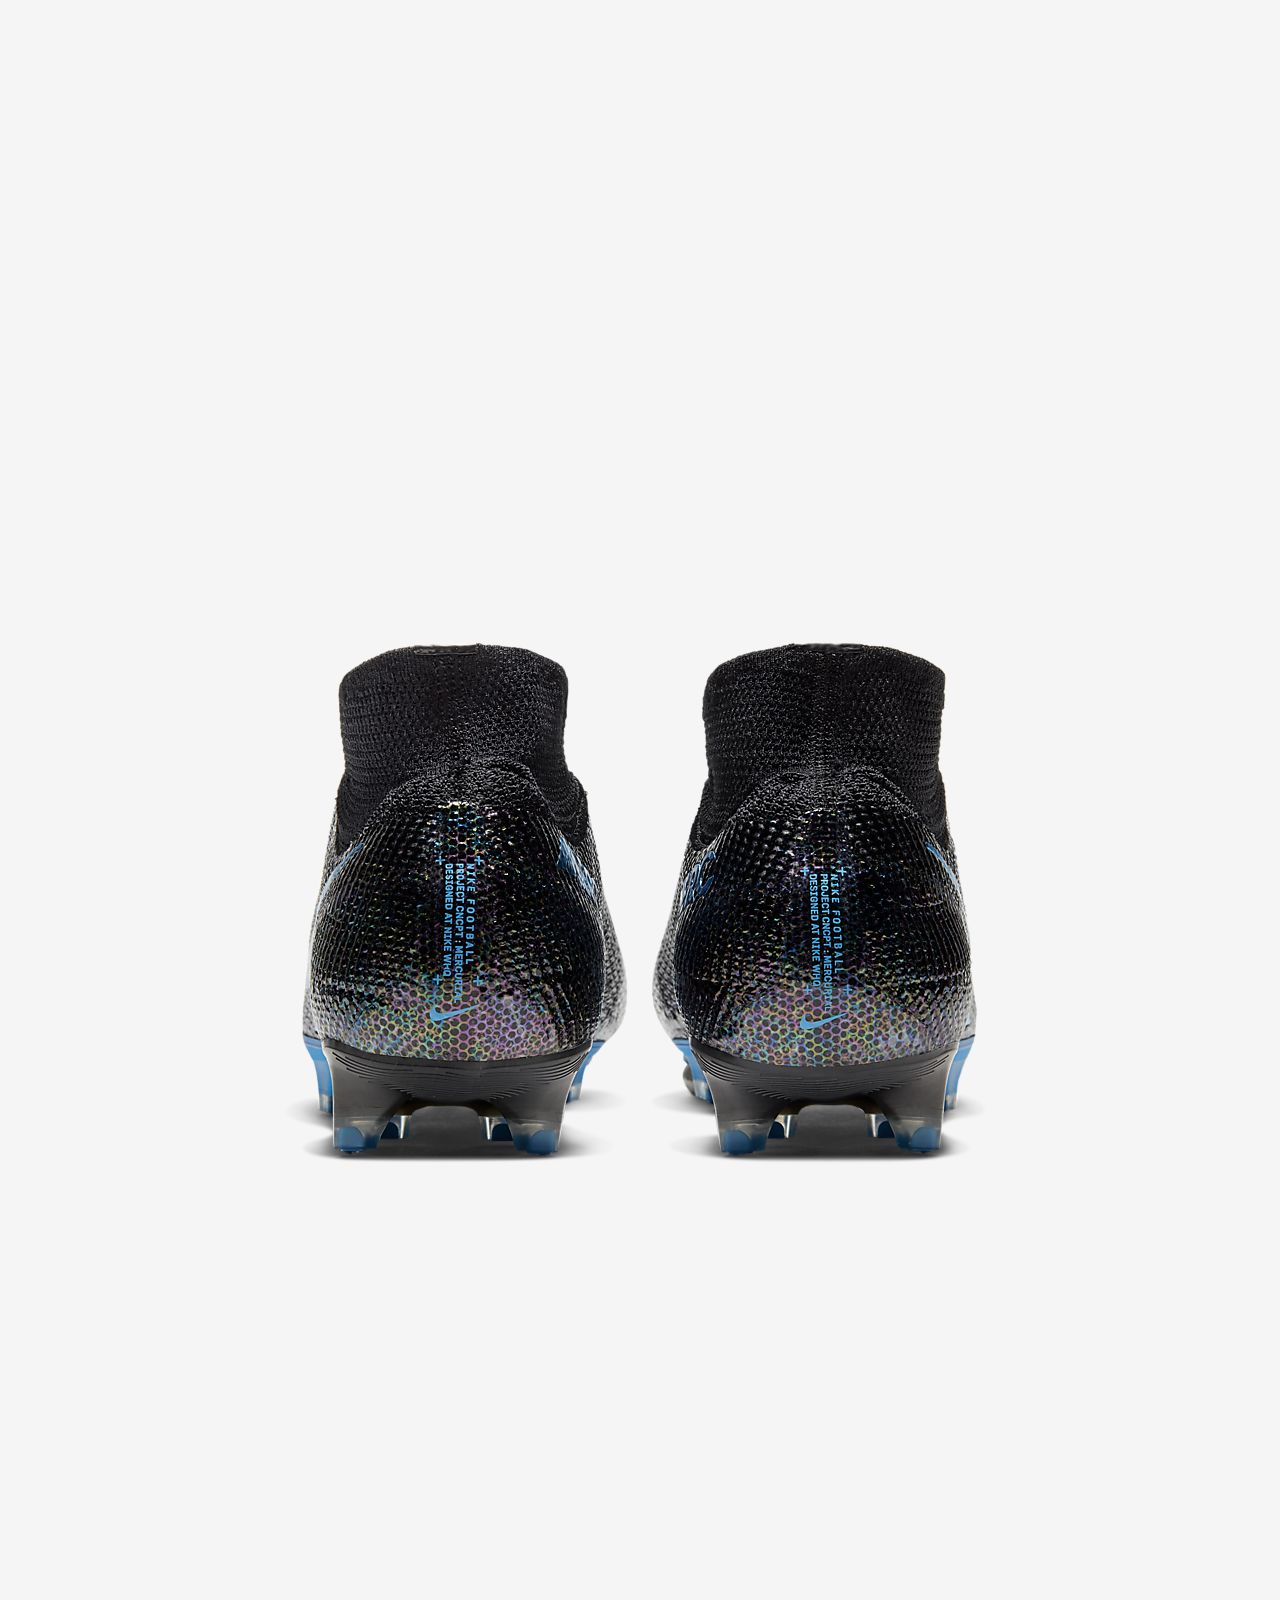 Review Nike Mercurial Superfly 360 Elite BOOTHYPE